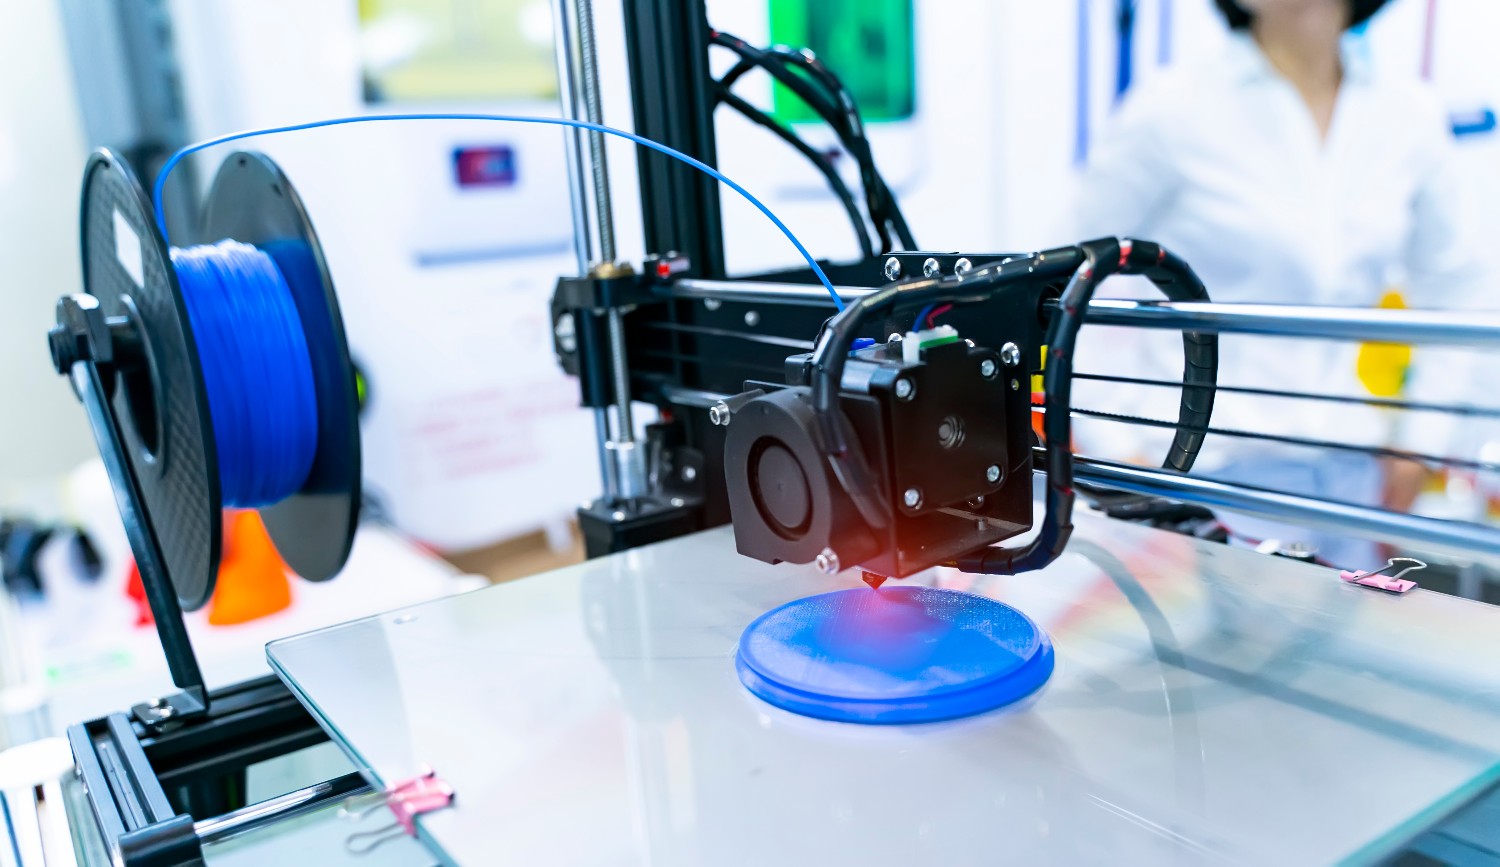 3D printer or additive manufacturing and robotic